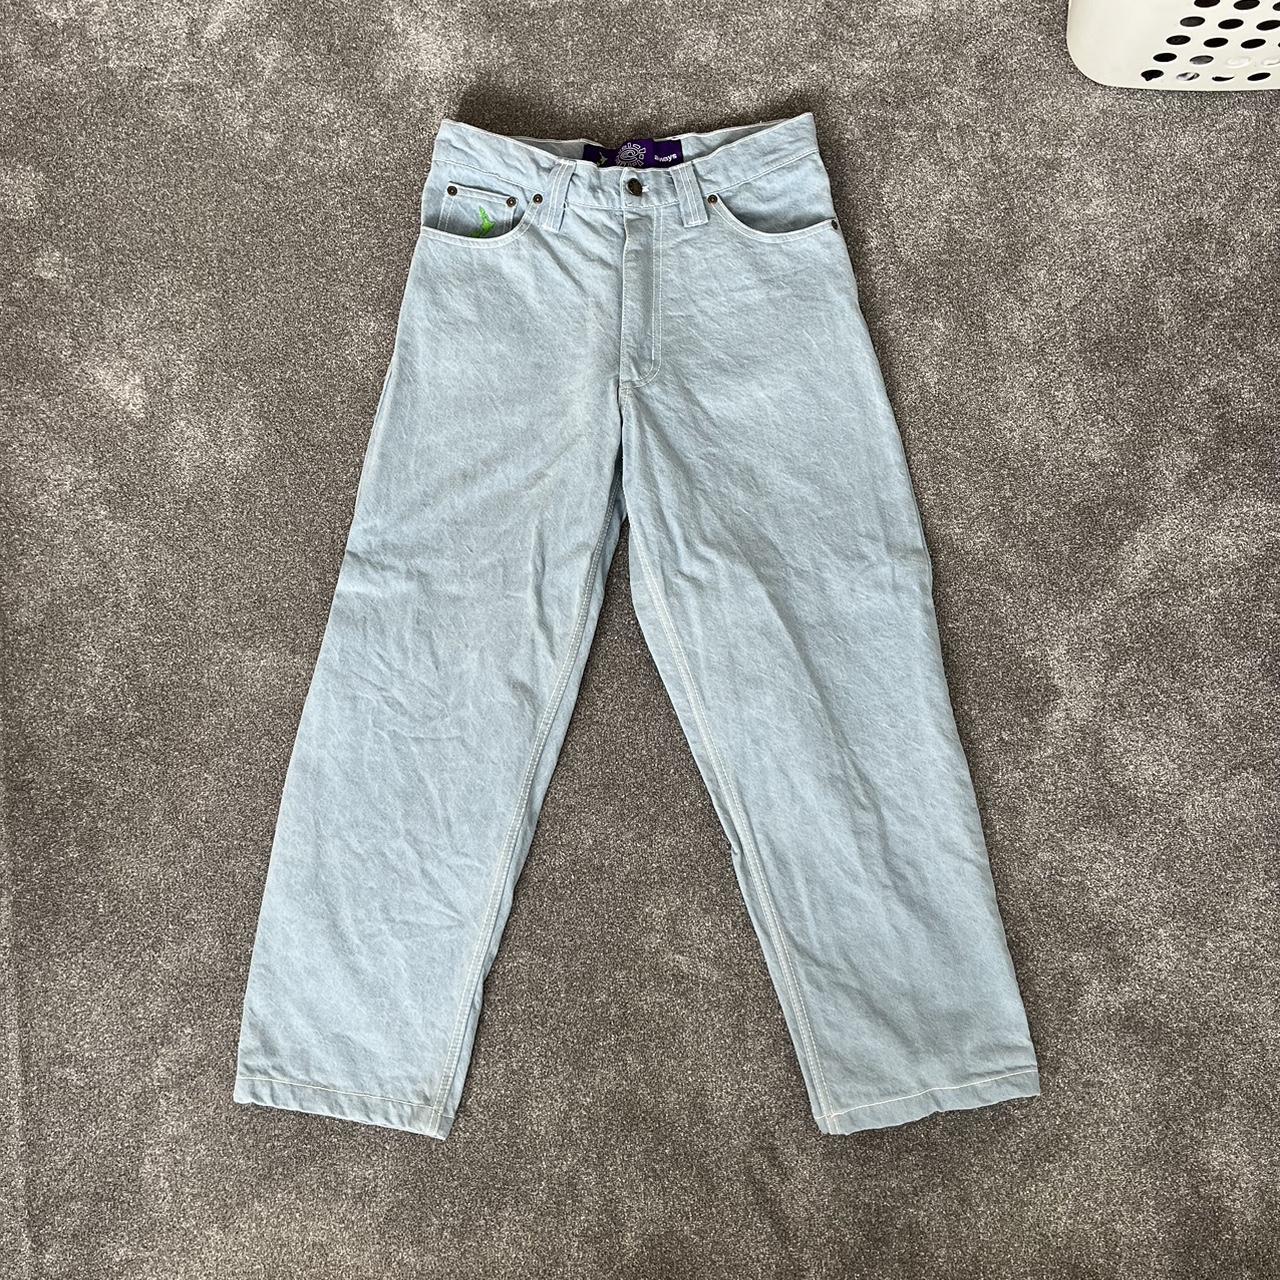 adwysd light blue jeans size M in perfect... - Depop